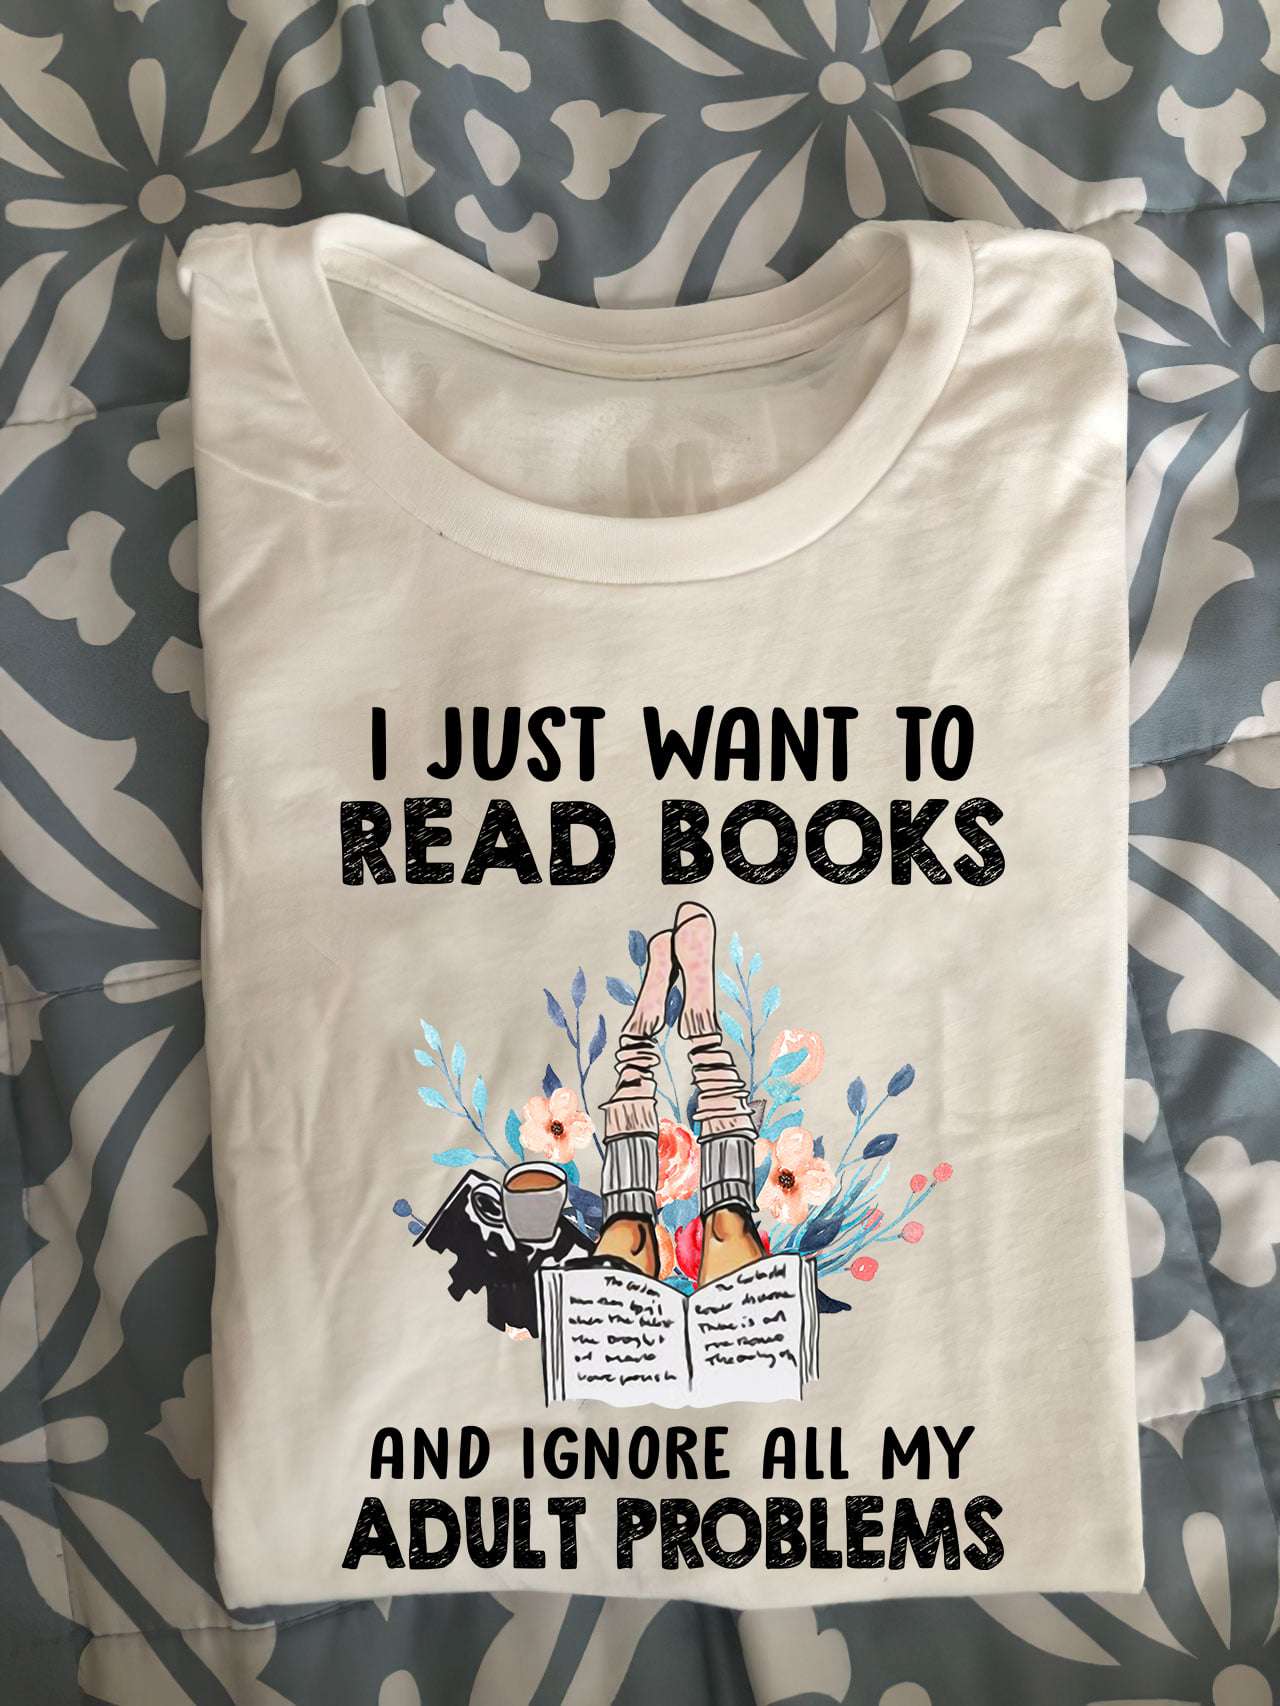 Girl Love Book - I just want to read books and ignore all my adult problems